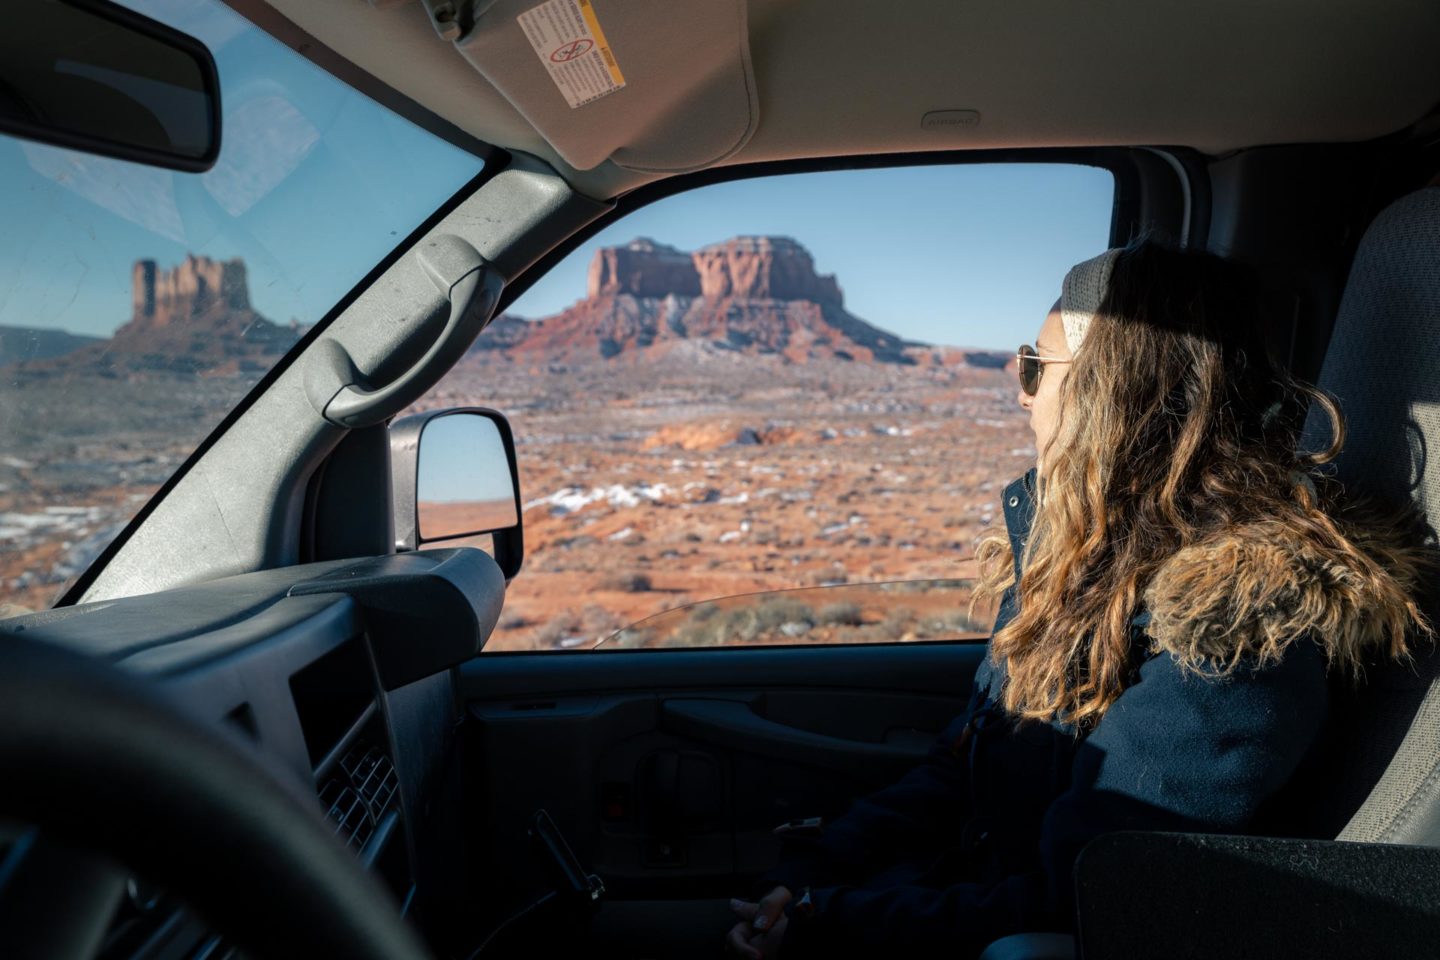 37 Great Must-Have Car Accessories For Your Next Road Trip [Updated 2022]